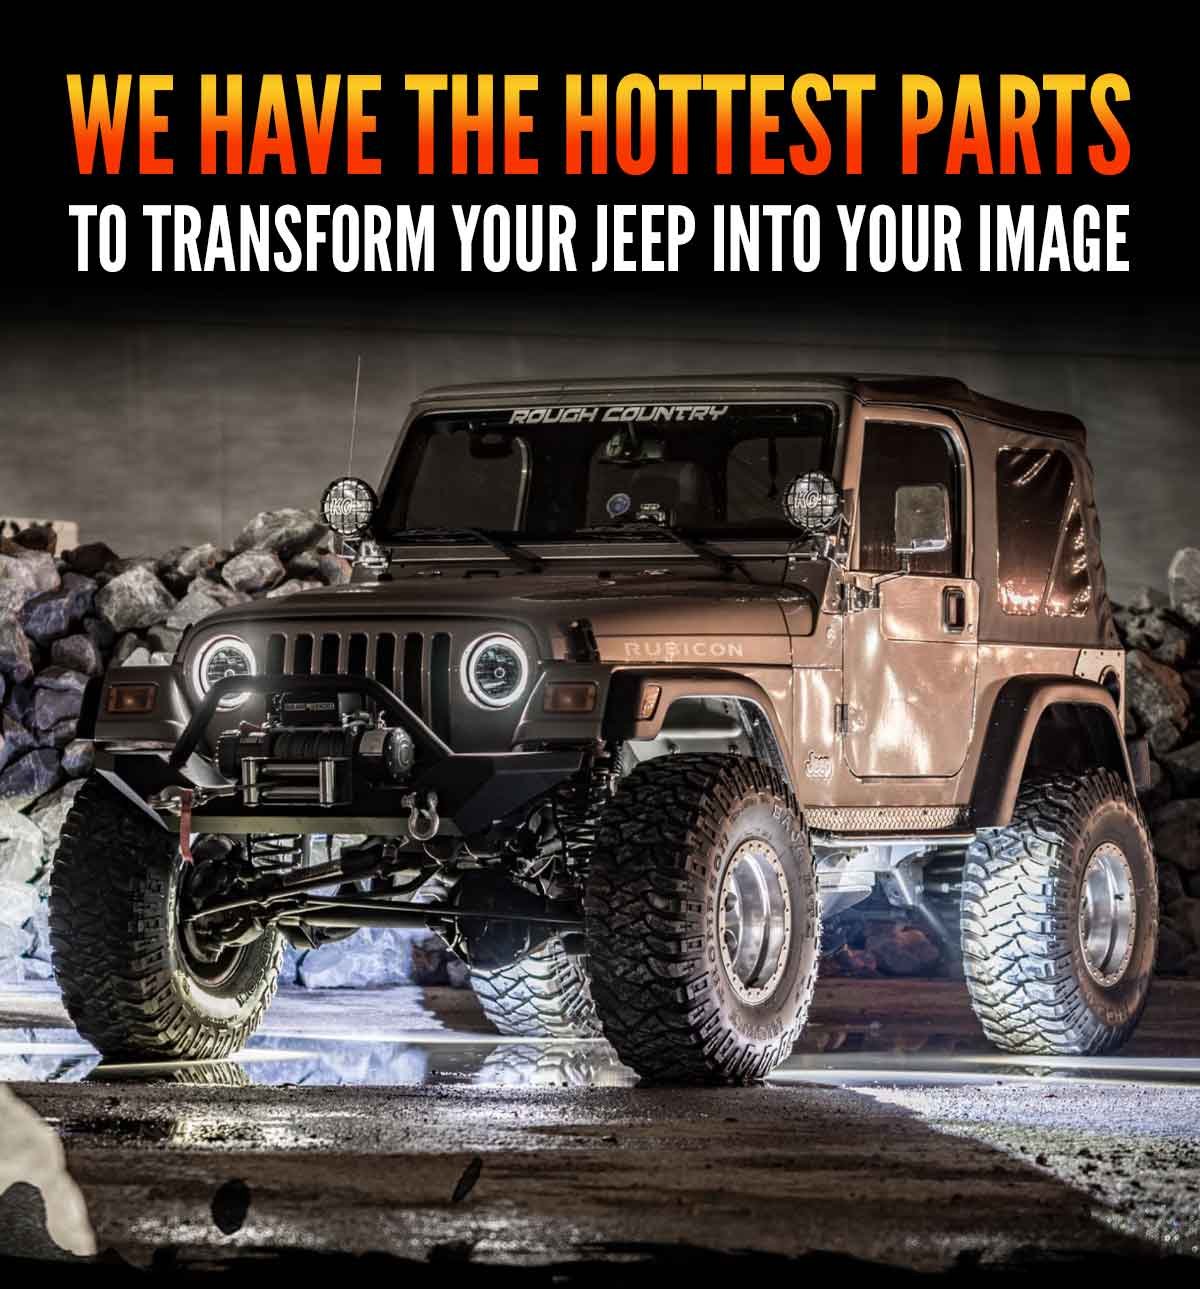 We Have The Hottest Parts To Transform Your Jeep Into Your Image